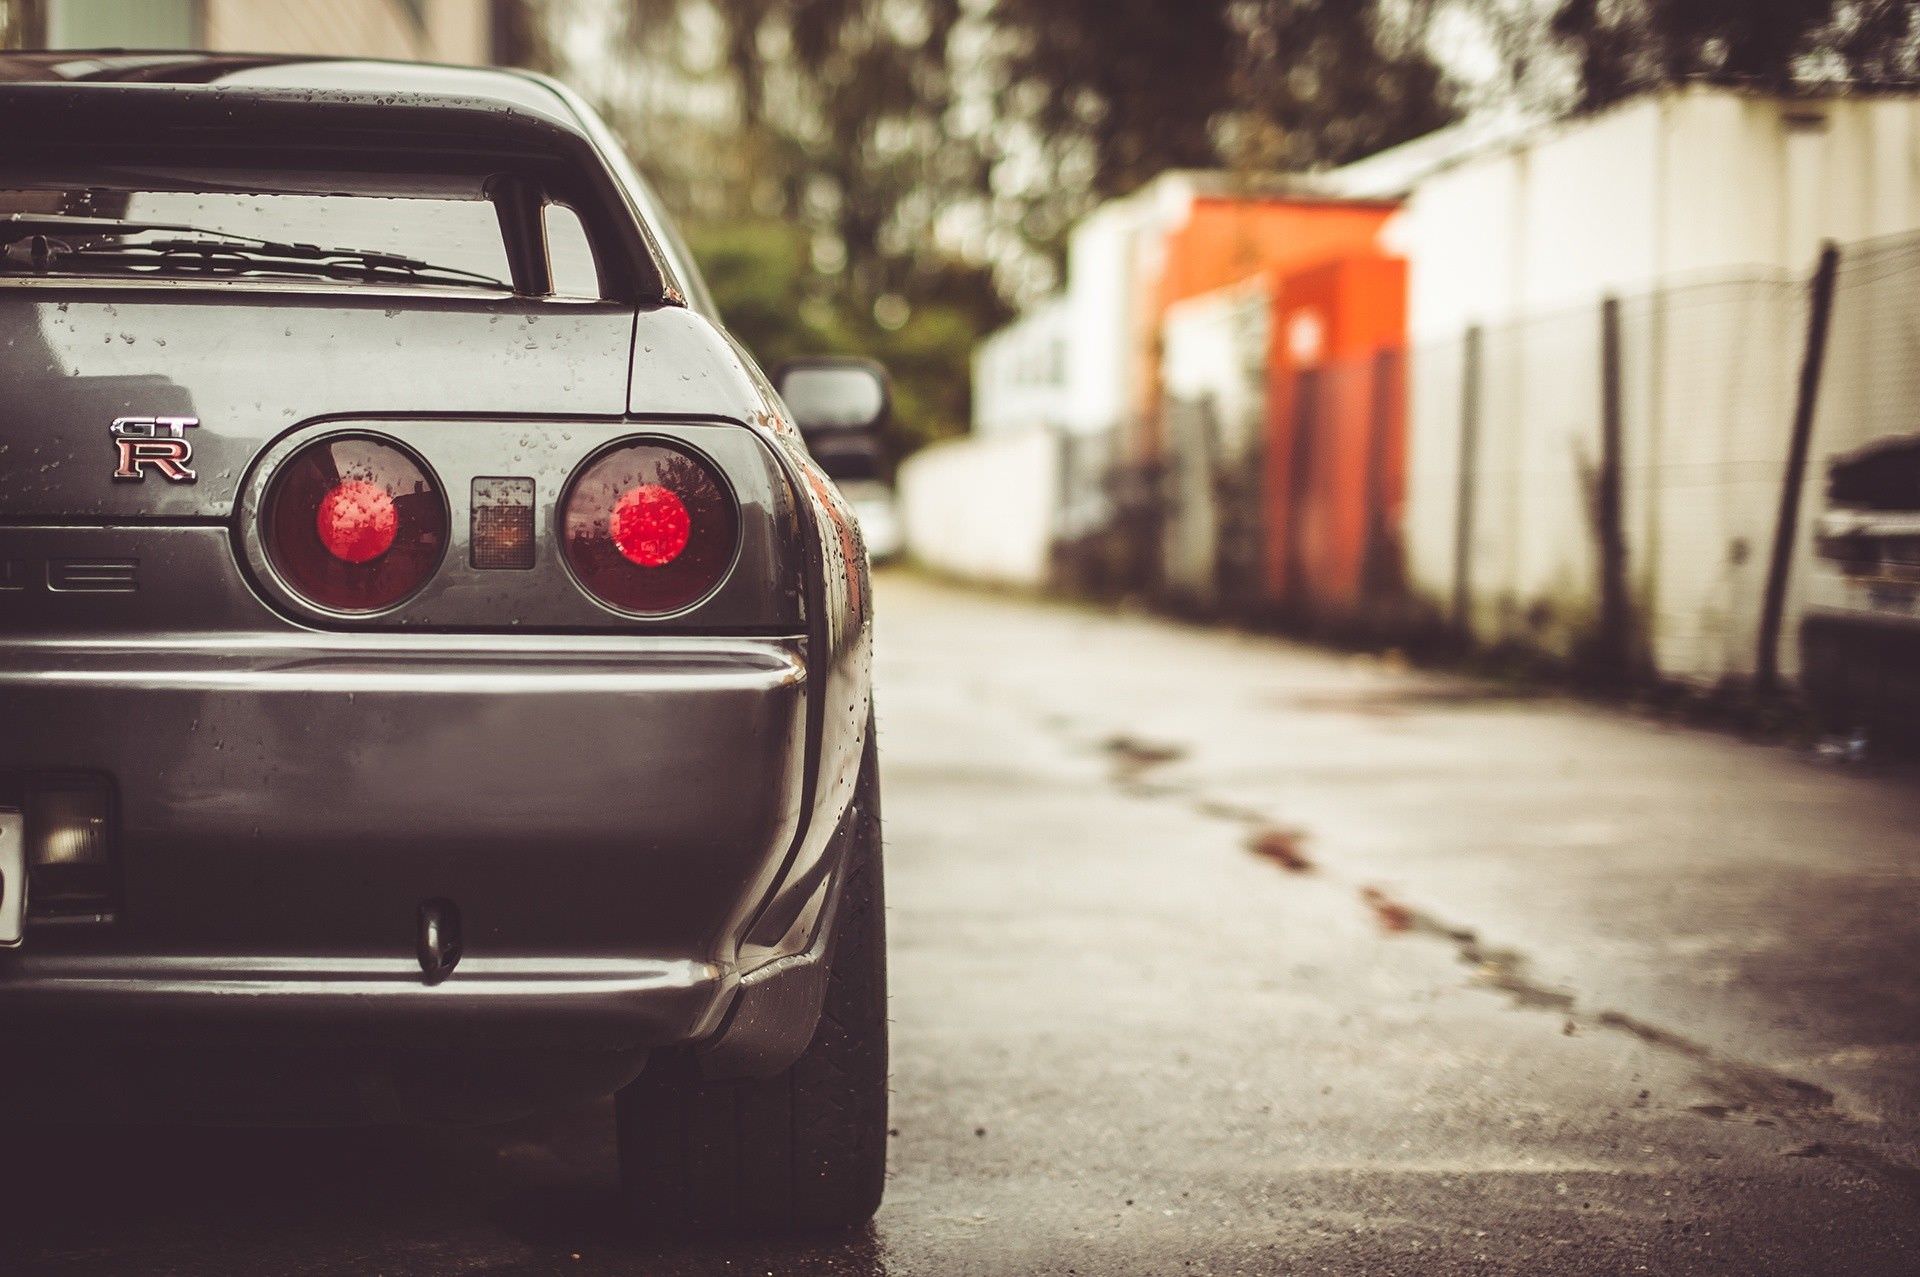 Nissan R32 Skyline  Free Wallpapers for iPhone Android Desktop  Phone